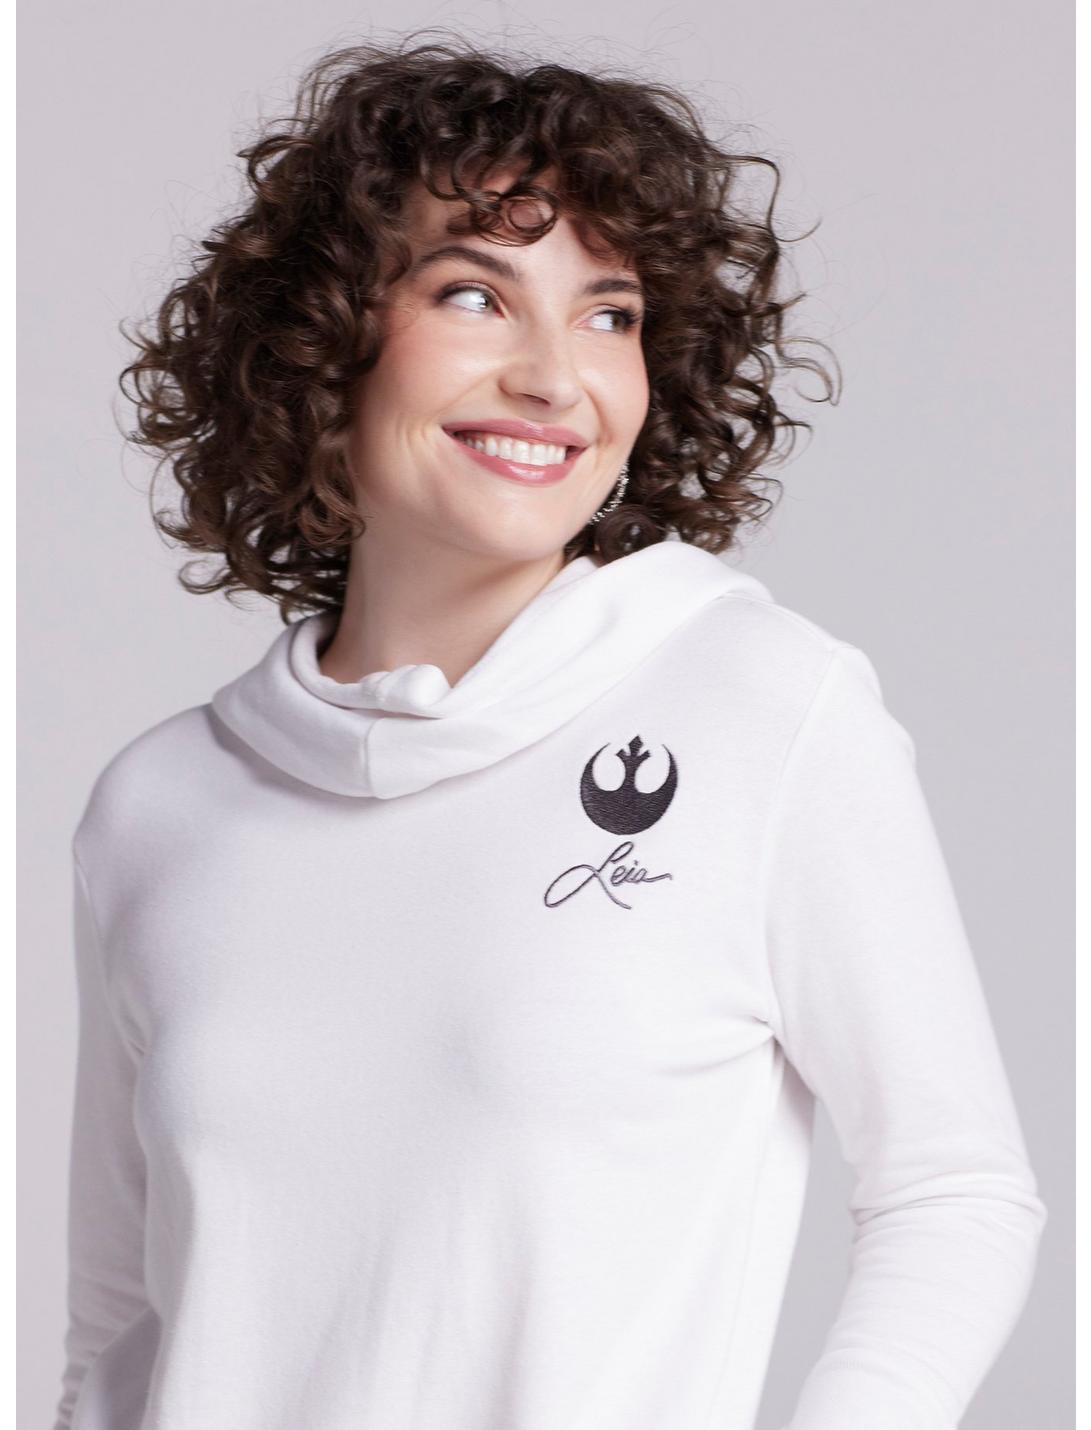 Her Universe Star Wars Princess Leia Cowl Long-Sleeve Top Her Universe Exclusive, OFF WHITE, hi-res